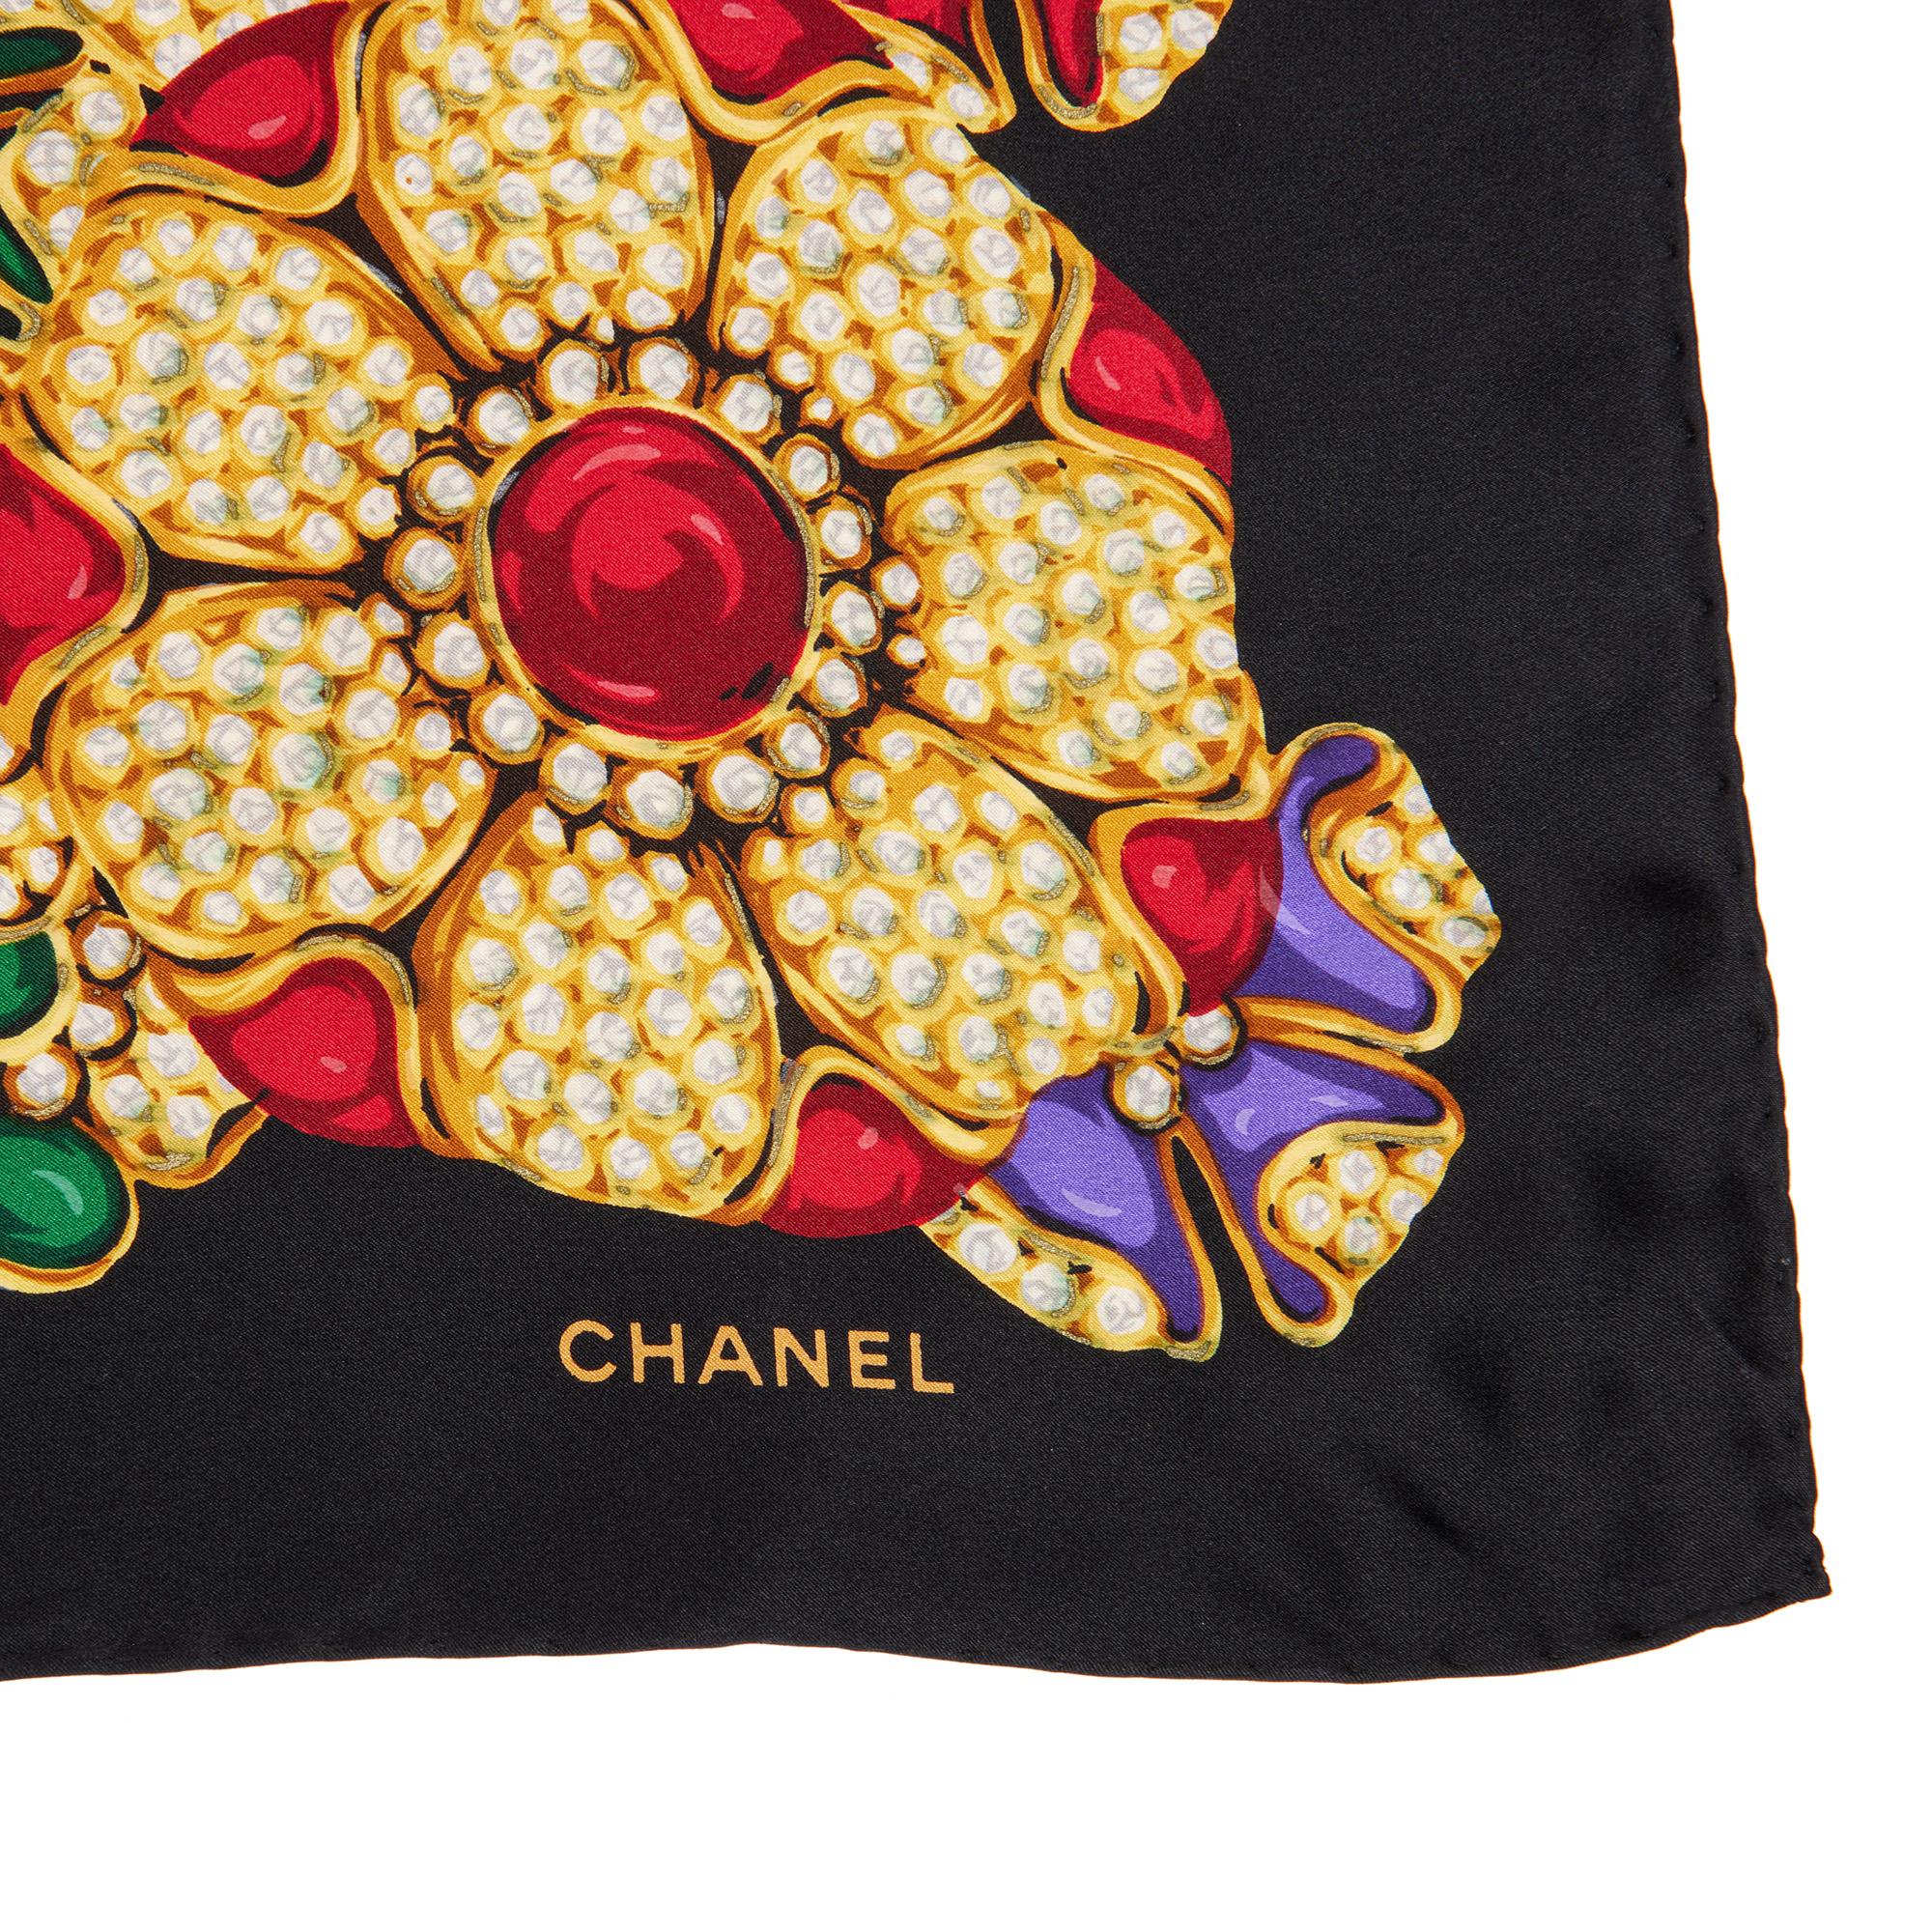 Chanel Black, Red, Purple, & Green Silk Vintage Flower Scarf

CONDITION NOTES
The hardware is in excellent condition with light signs of use.
Overall this item is in excellent pre-owned condition. Please note the majority of the items we sell are